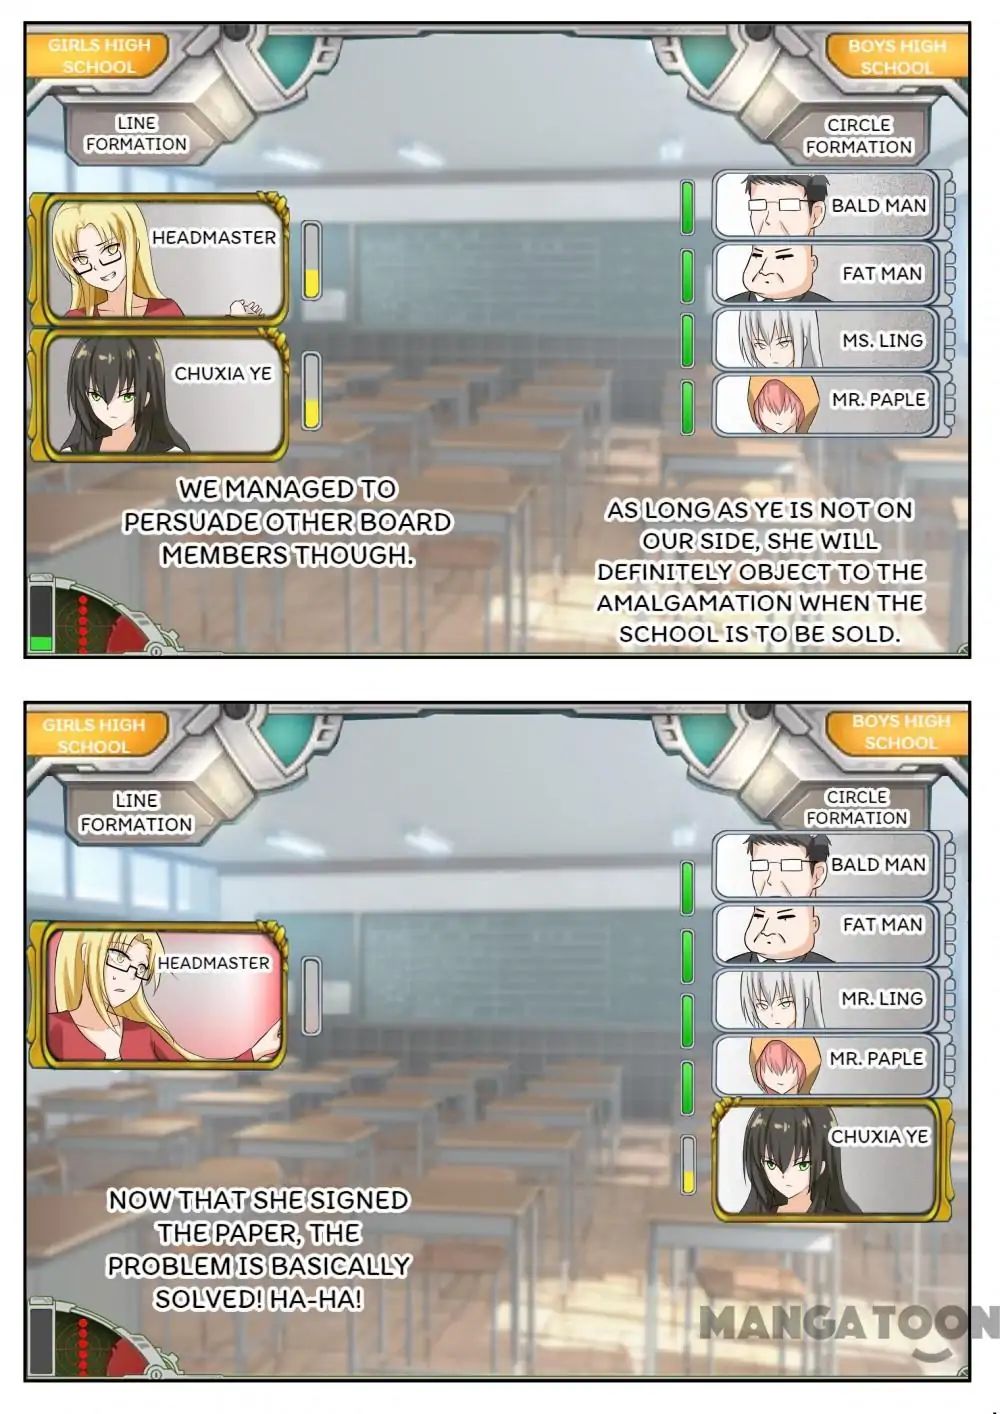 The Boy In The All-Girls School - Page 4